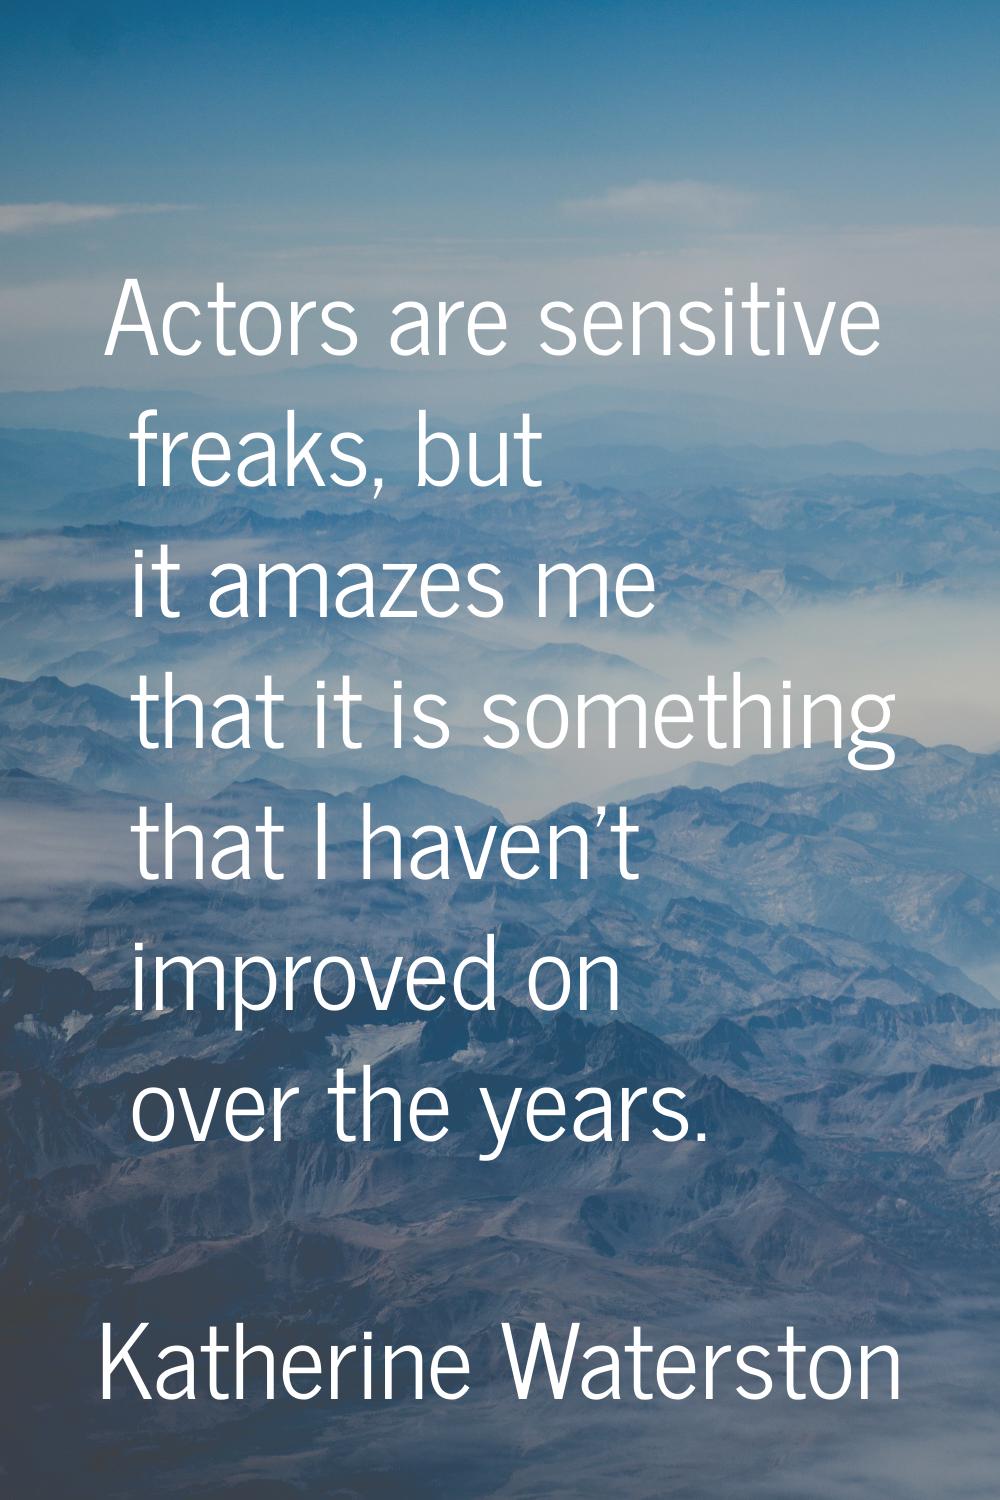 Actors are sensitive freaks, but it amazes me that it is something that I haven't improved on over 